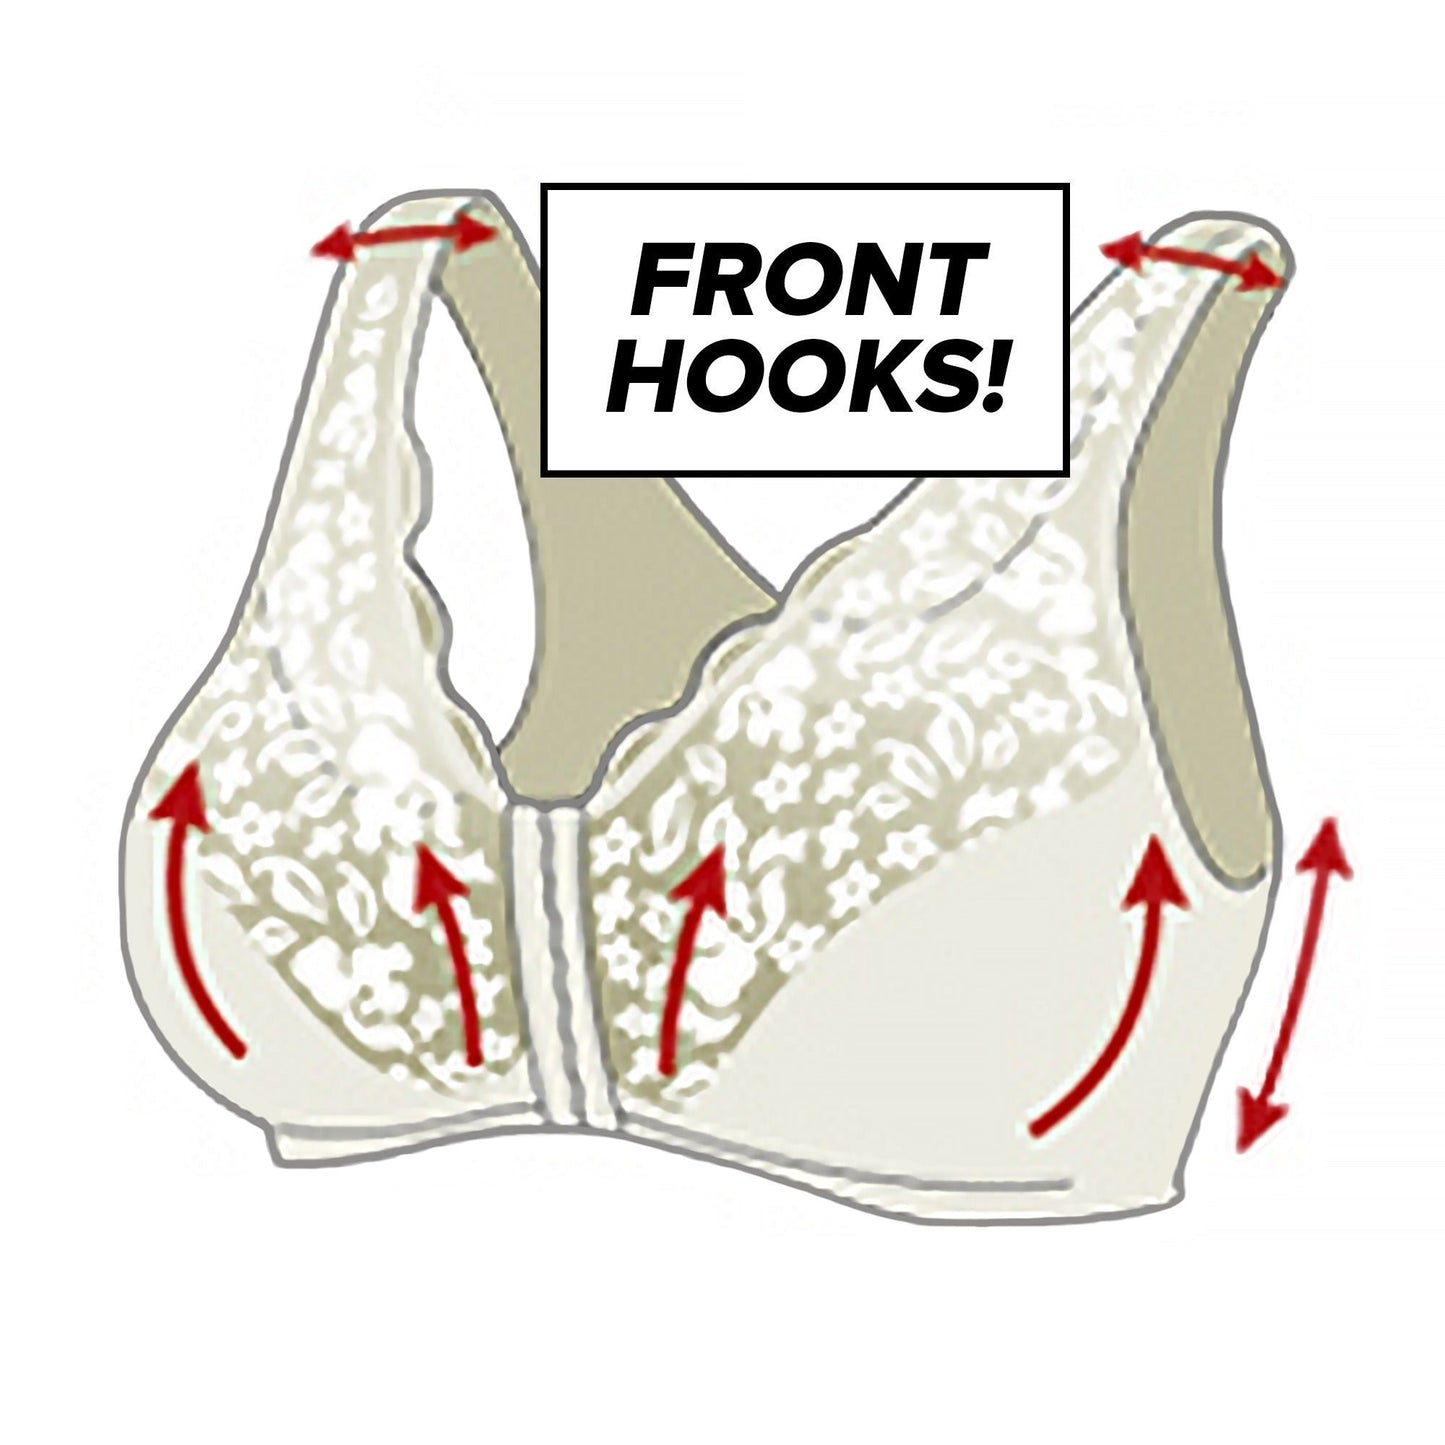 Front hooks, stretch-lace, super-lift, and posture correction ¨C ALL IN ONE BRA!